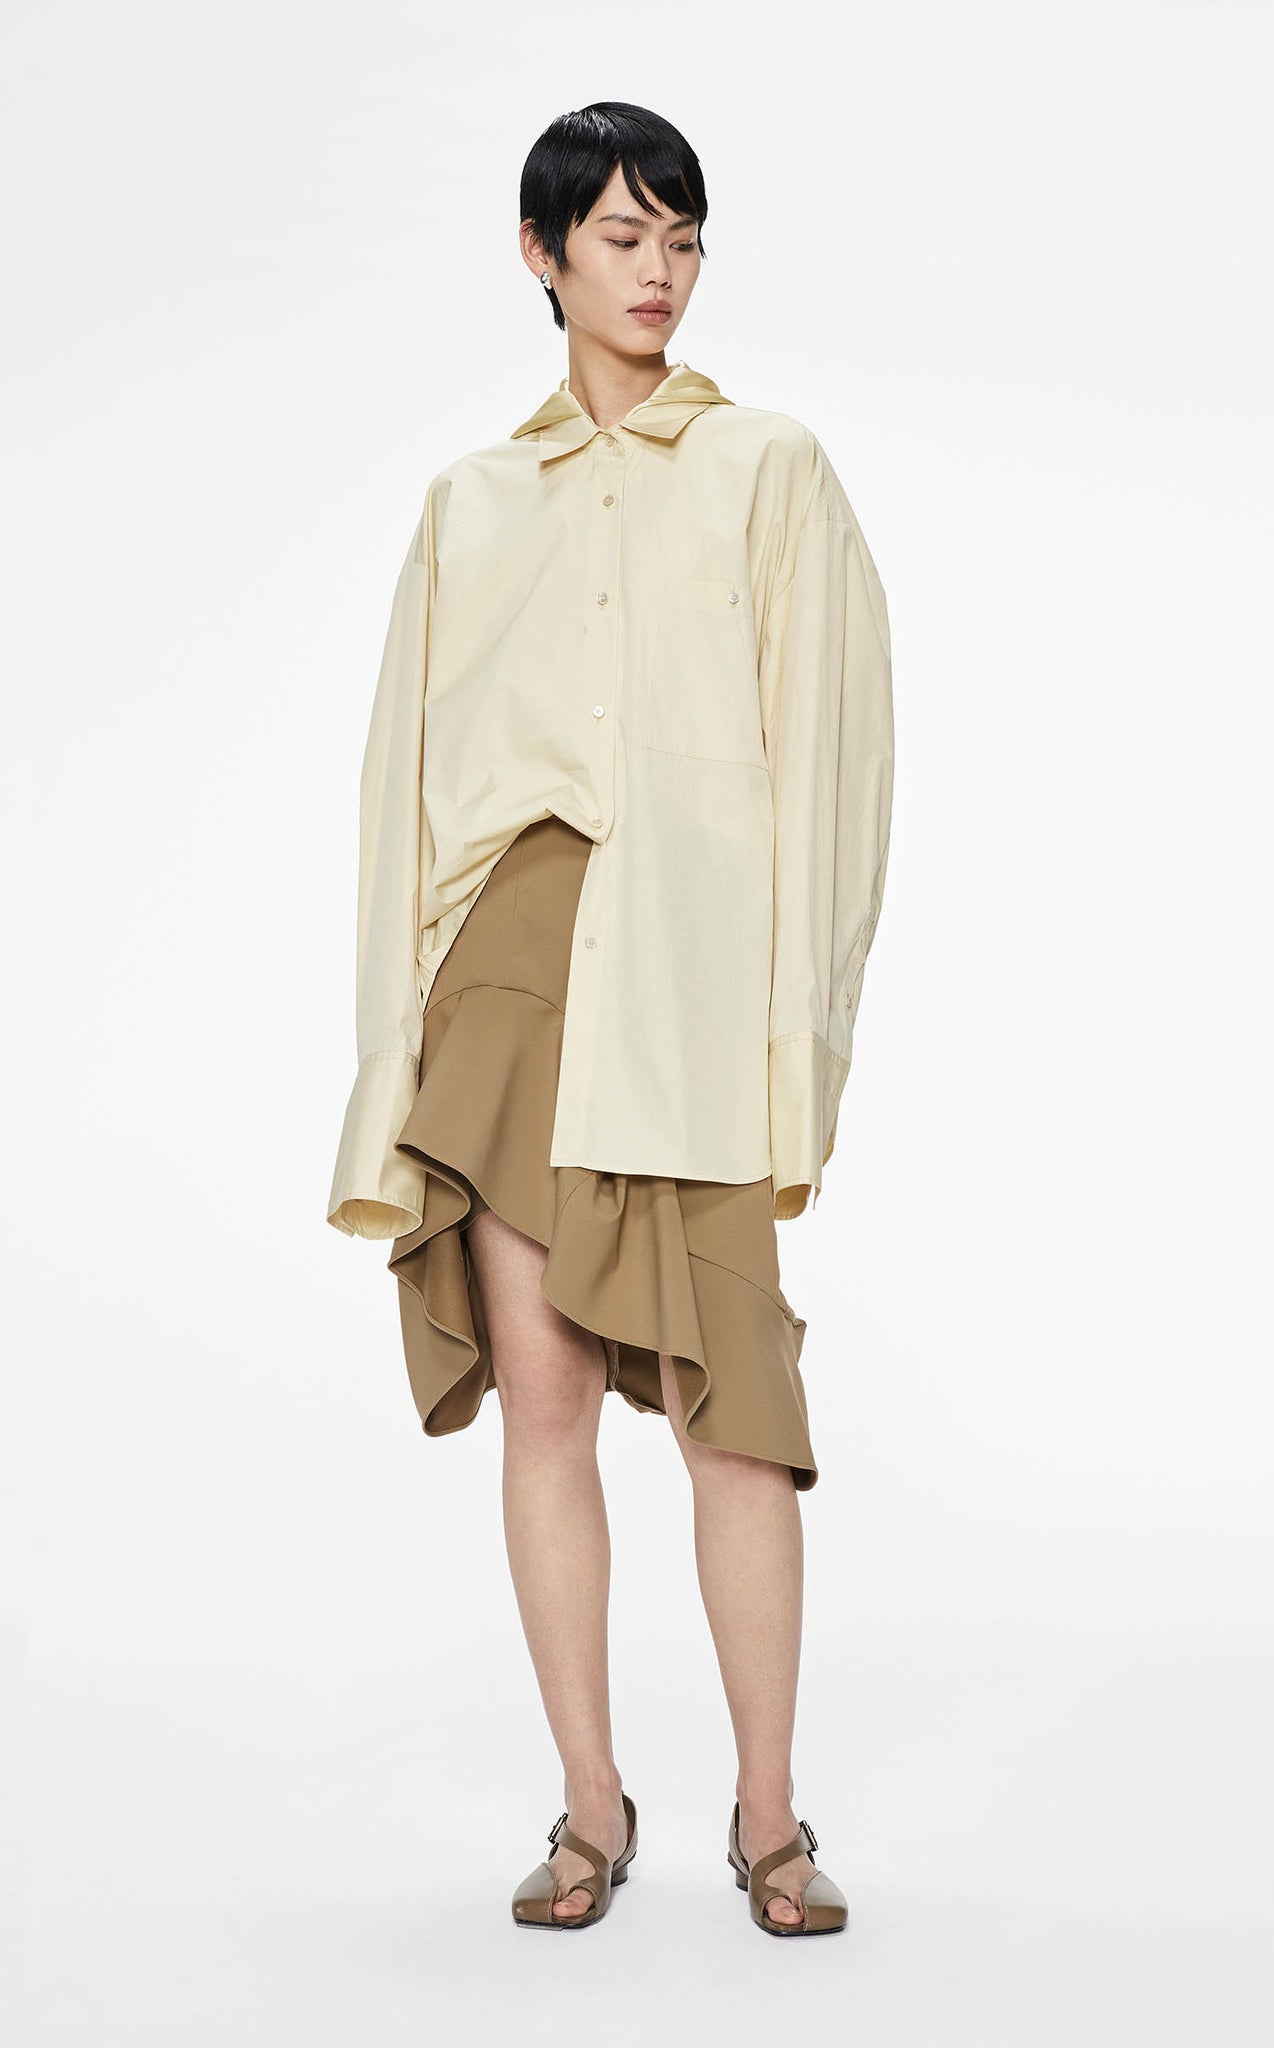 Shirts / JNBY Oversize Solid Color H-Line Long Sleeve Shirt